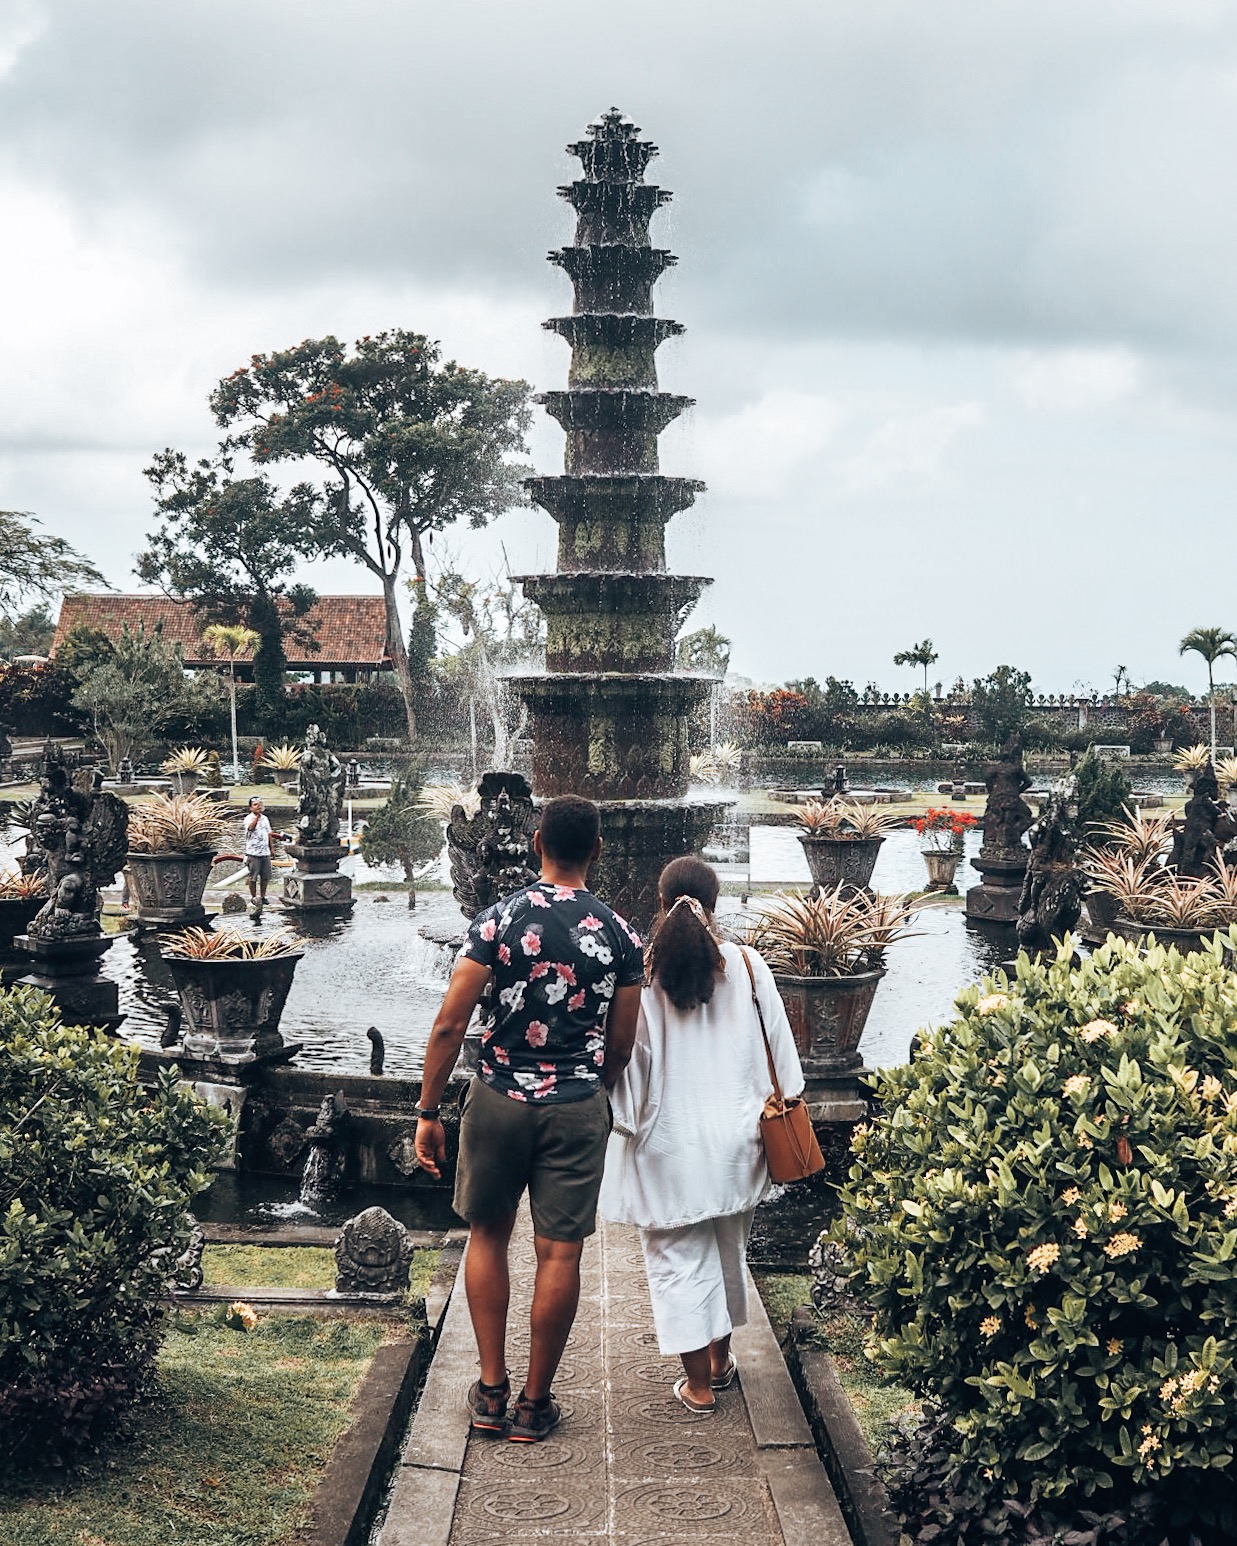 Our Bali Honeymoon: A Travel Guide. Where to eat, stay and what to do in Canggu, Nusa Penida, Gili Air and Ubud | SimplyCantara.com